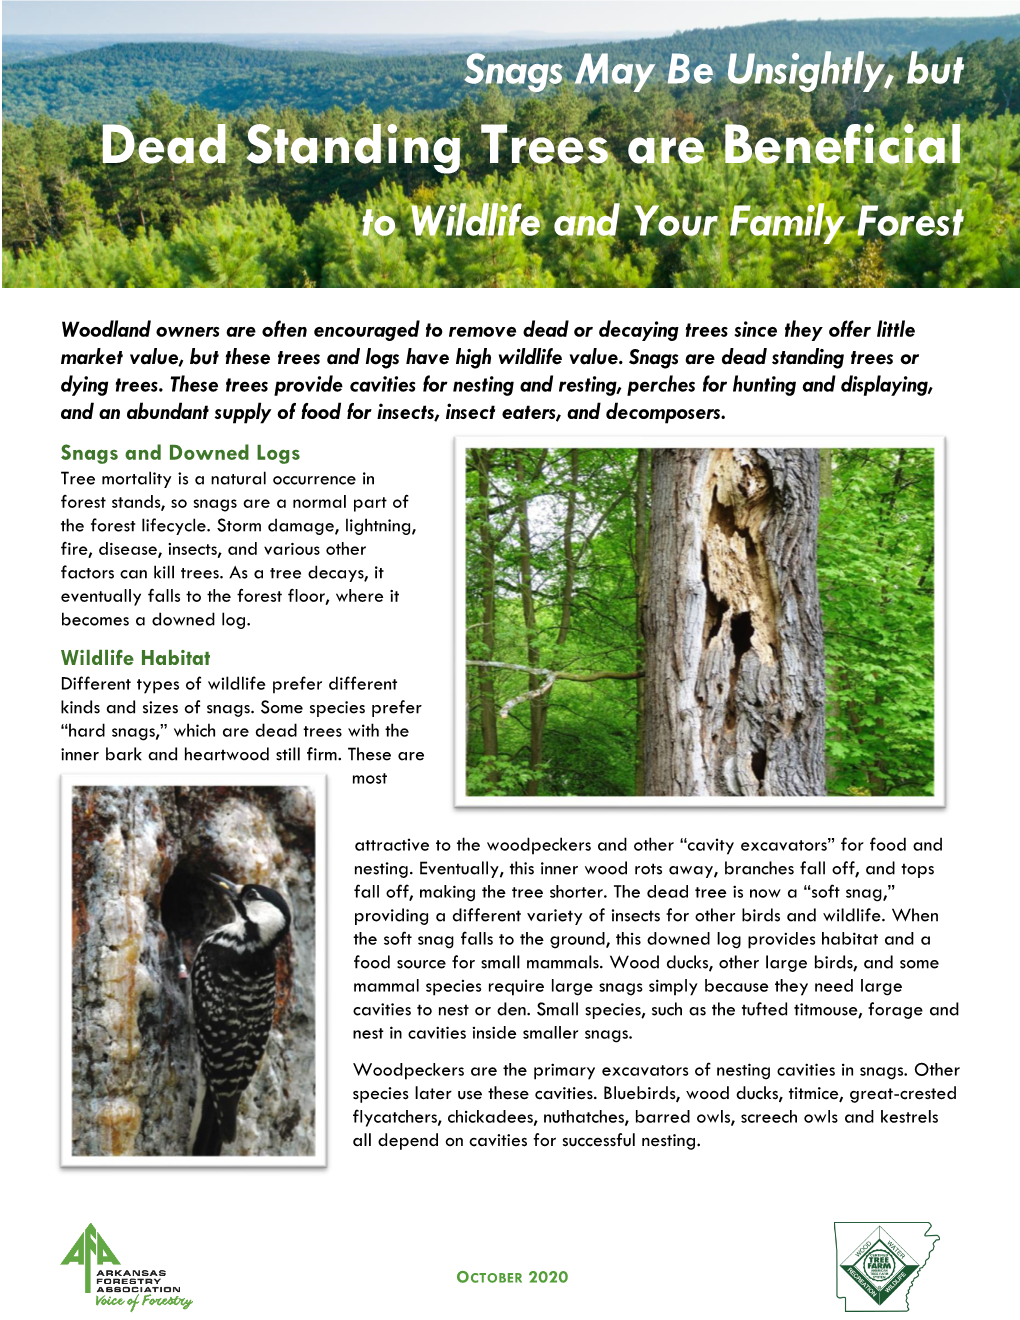 Snags May Be Unsightly, but Dead Standing Trees Are Beneficial to Wildlife and Your Family Forest